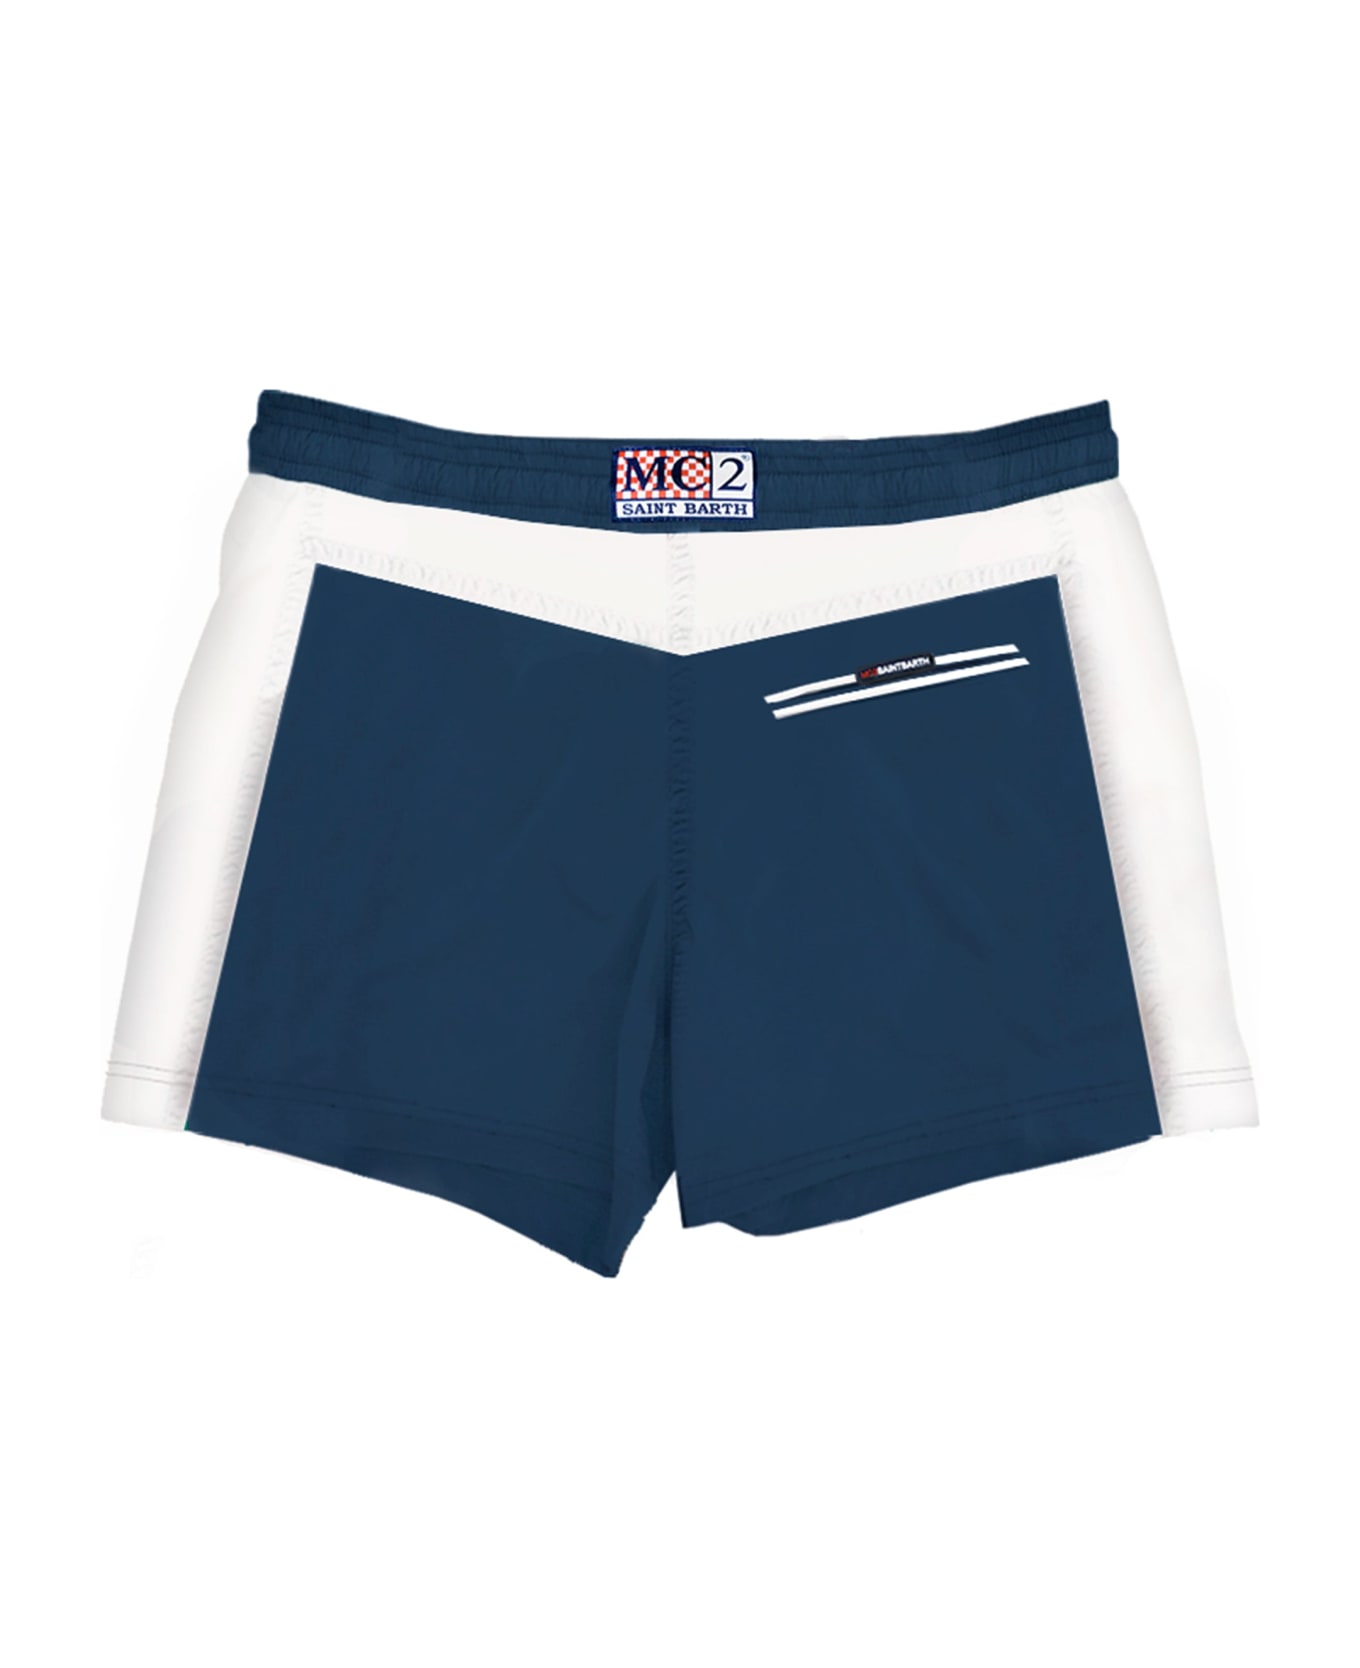 MC2 Saint Barth Man Swimshorts With Bands And Patch - BLUE